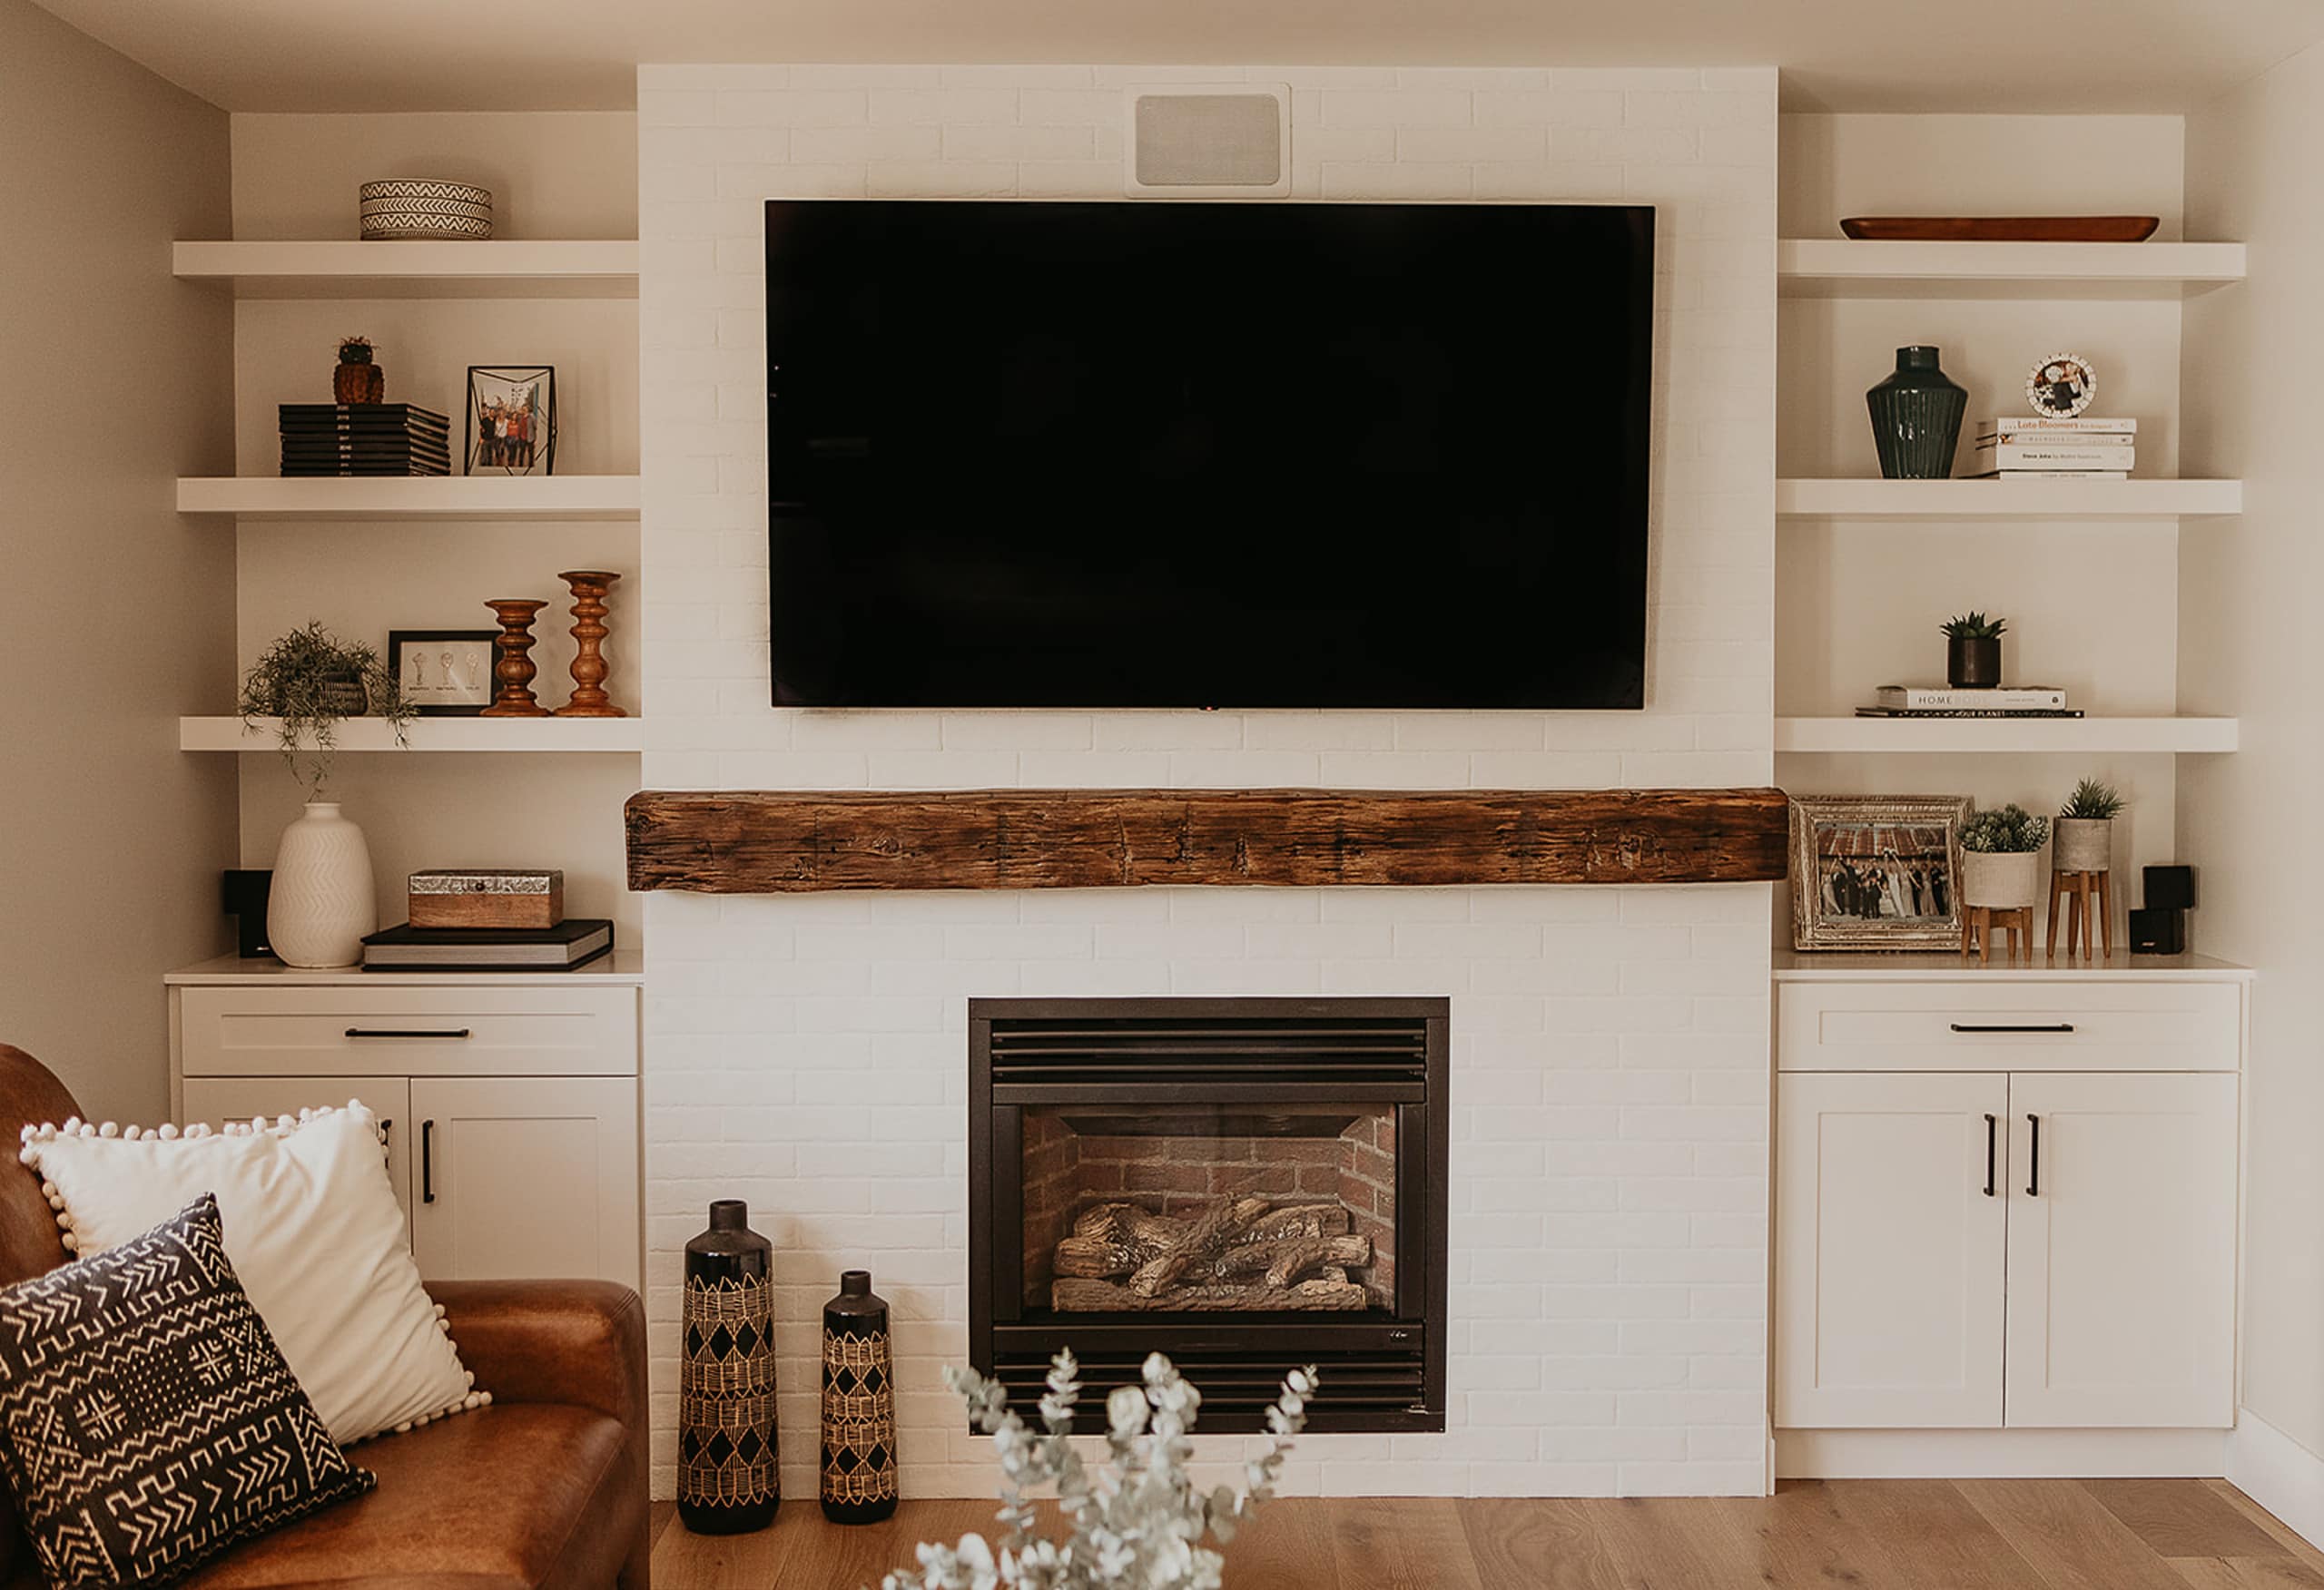 Modern farmhouse style in a living room with a wood mantle